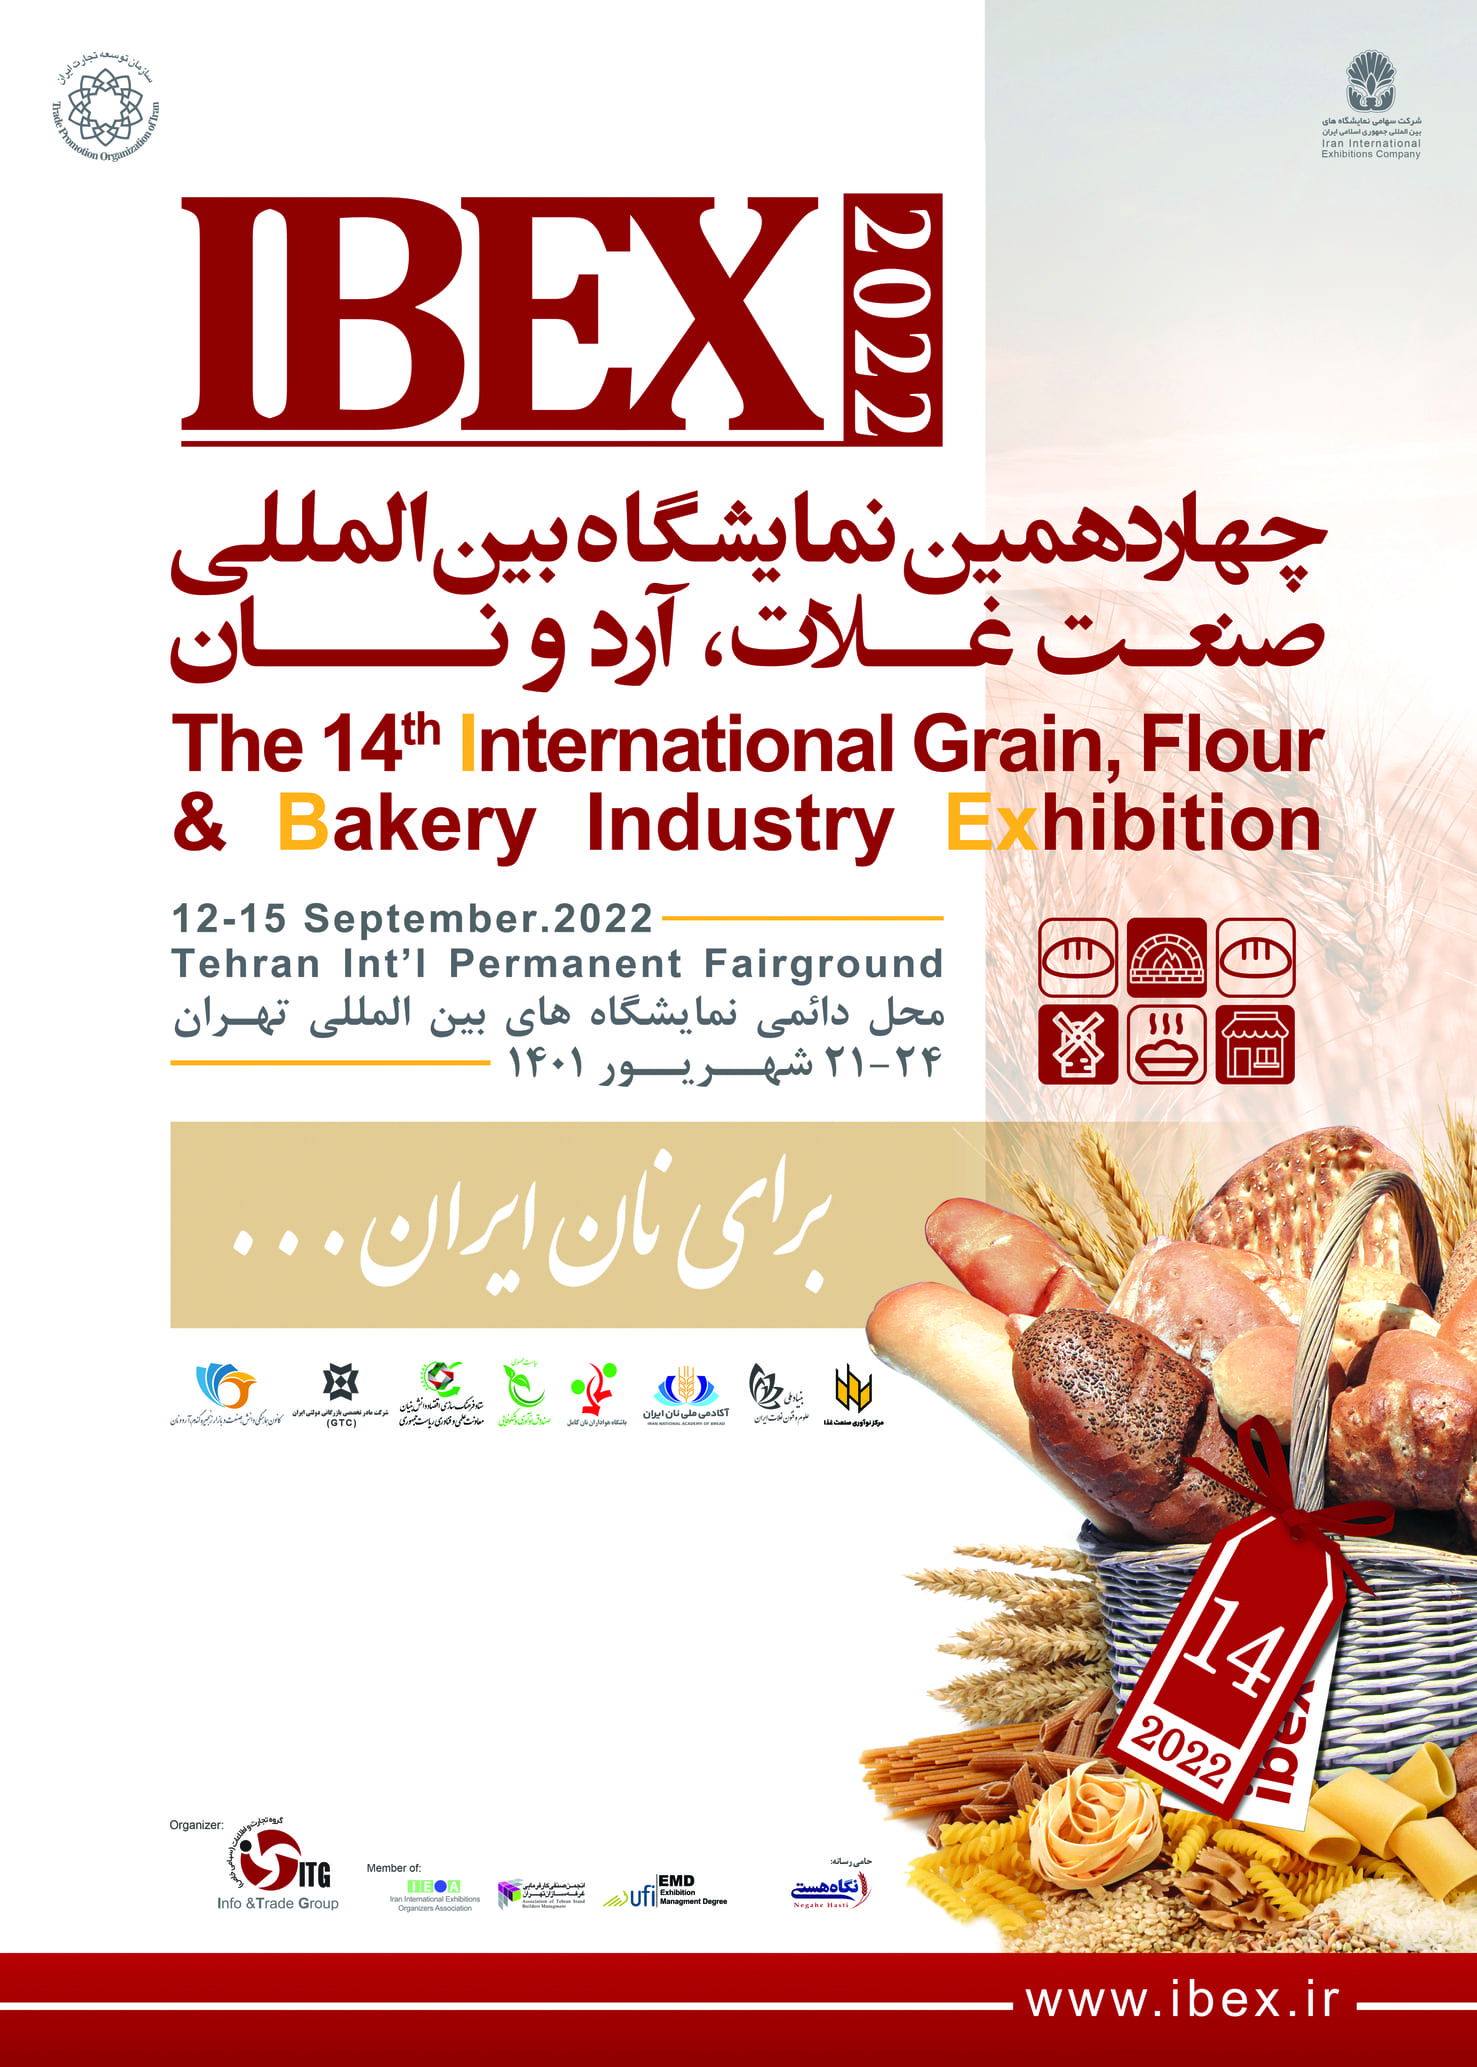 The Registration for the 14th Int’l Grain, Flour and Bakery Industry Exhibition (IBEX 2022) has started